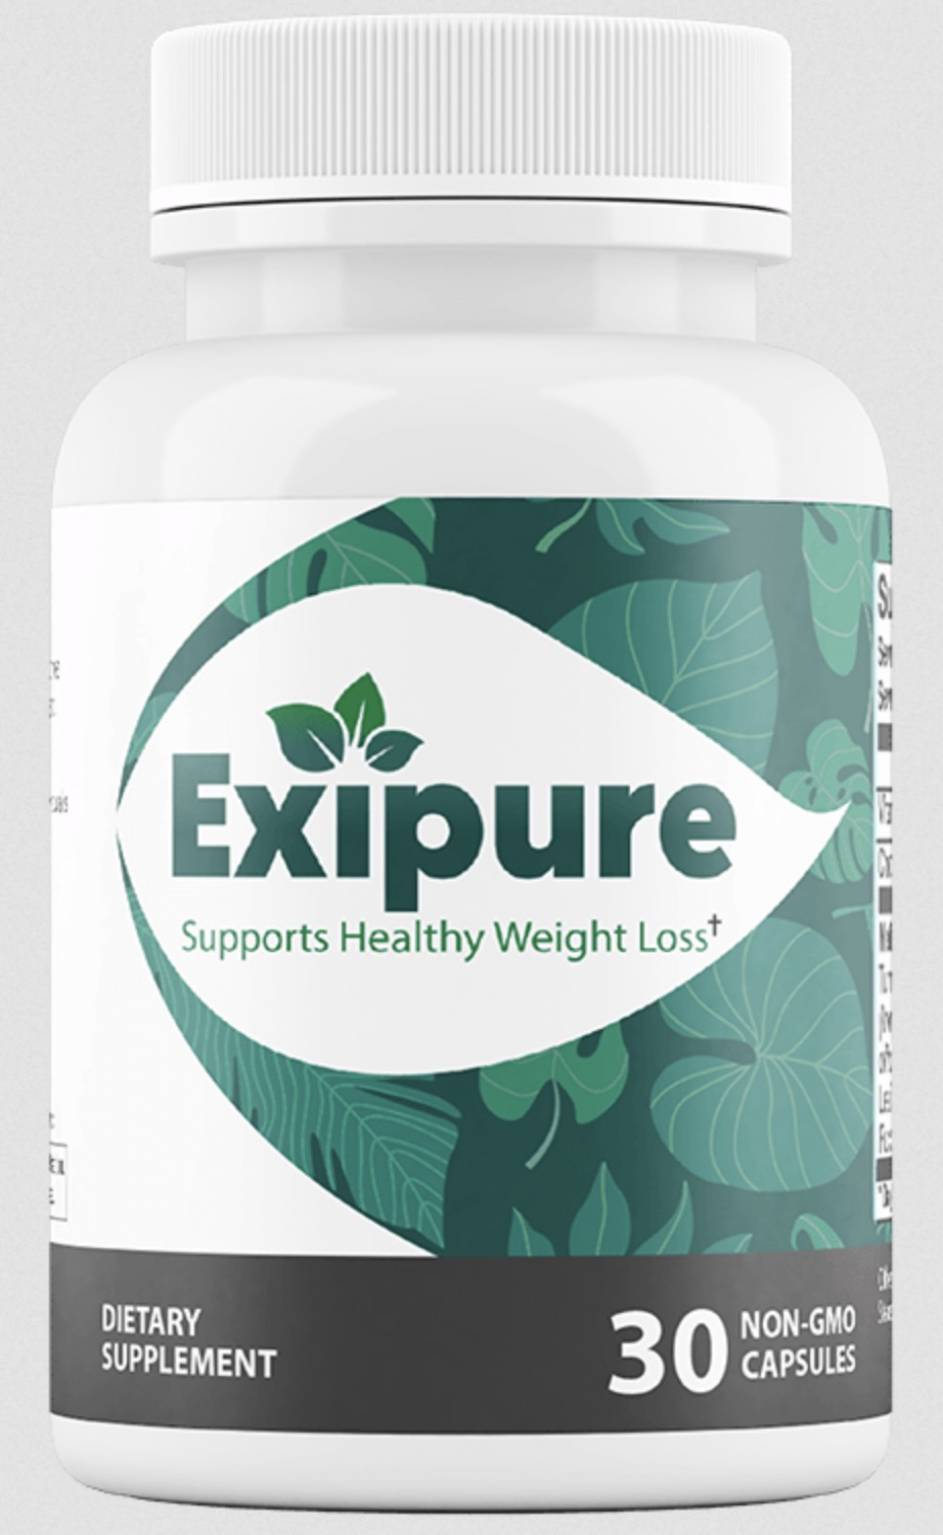 Exipure Weight Loss Pill Review